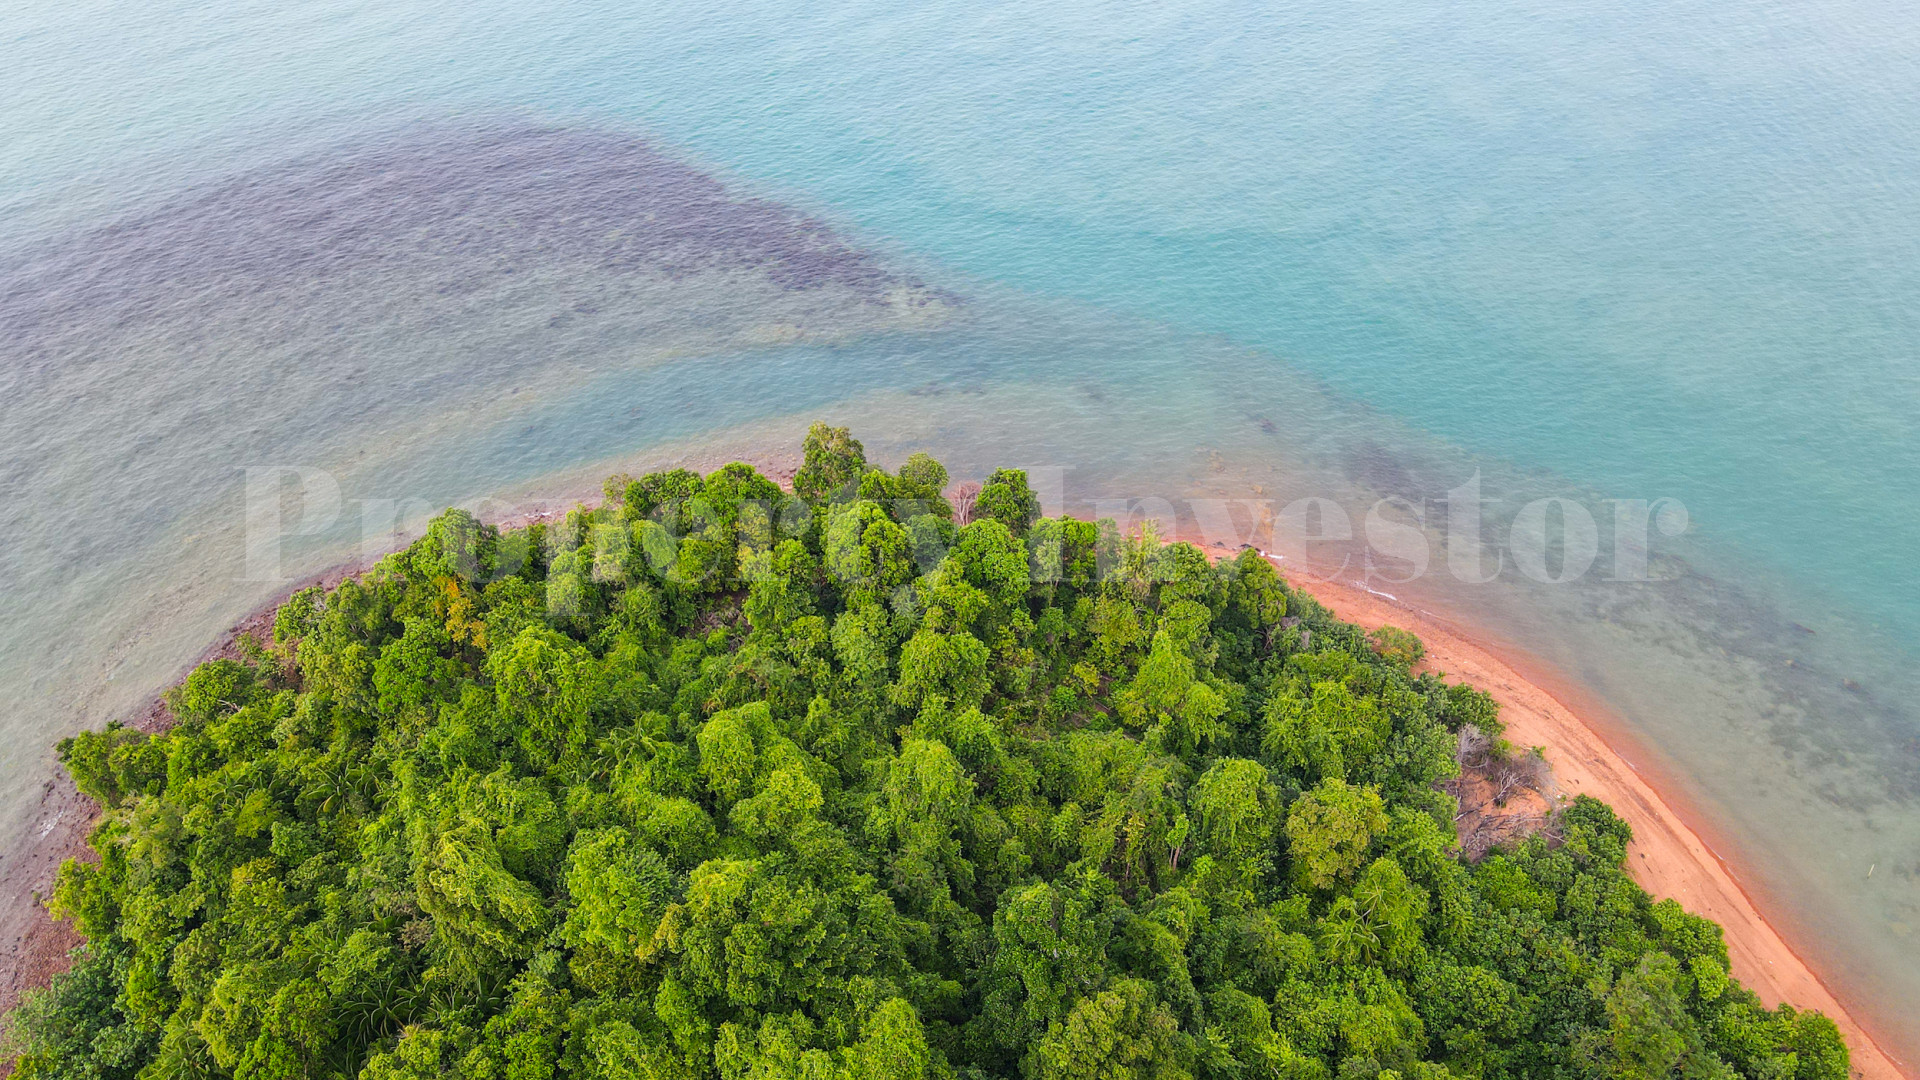 12.5 Hectare Virgin Island for Sale Near the Singapore Strait, Indonesia